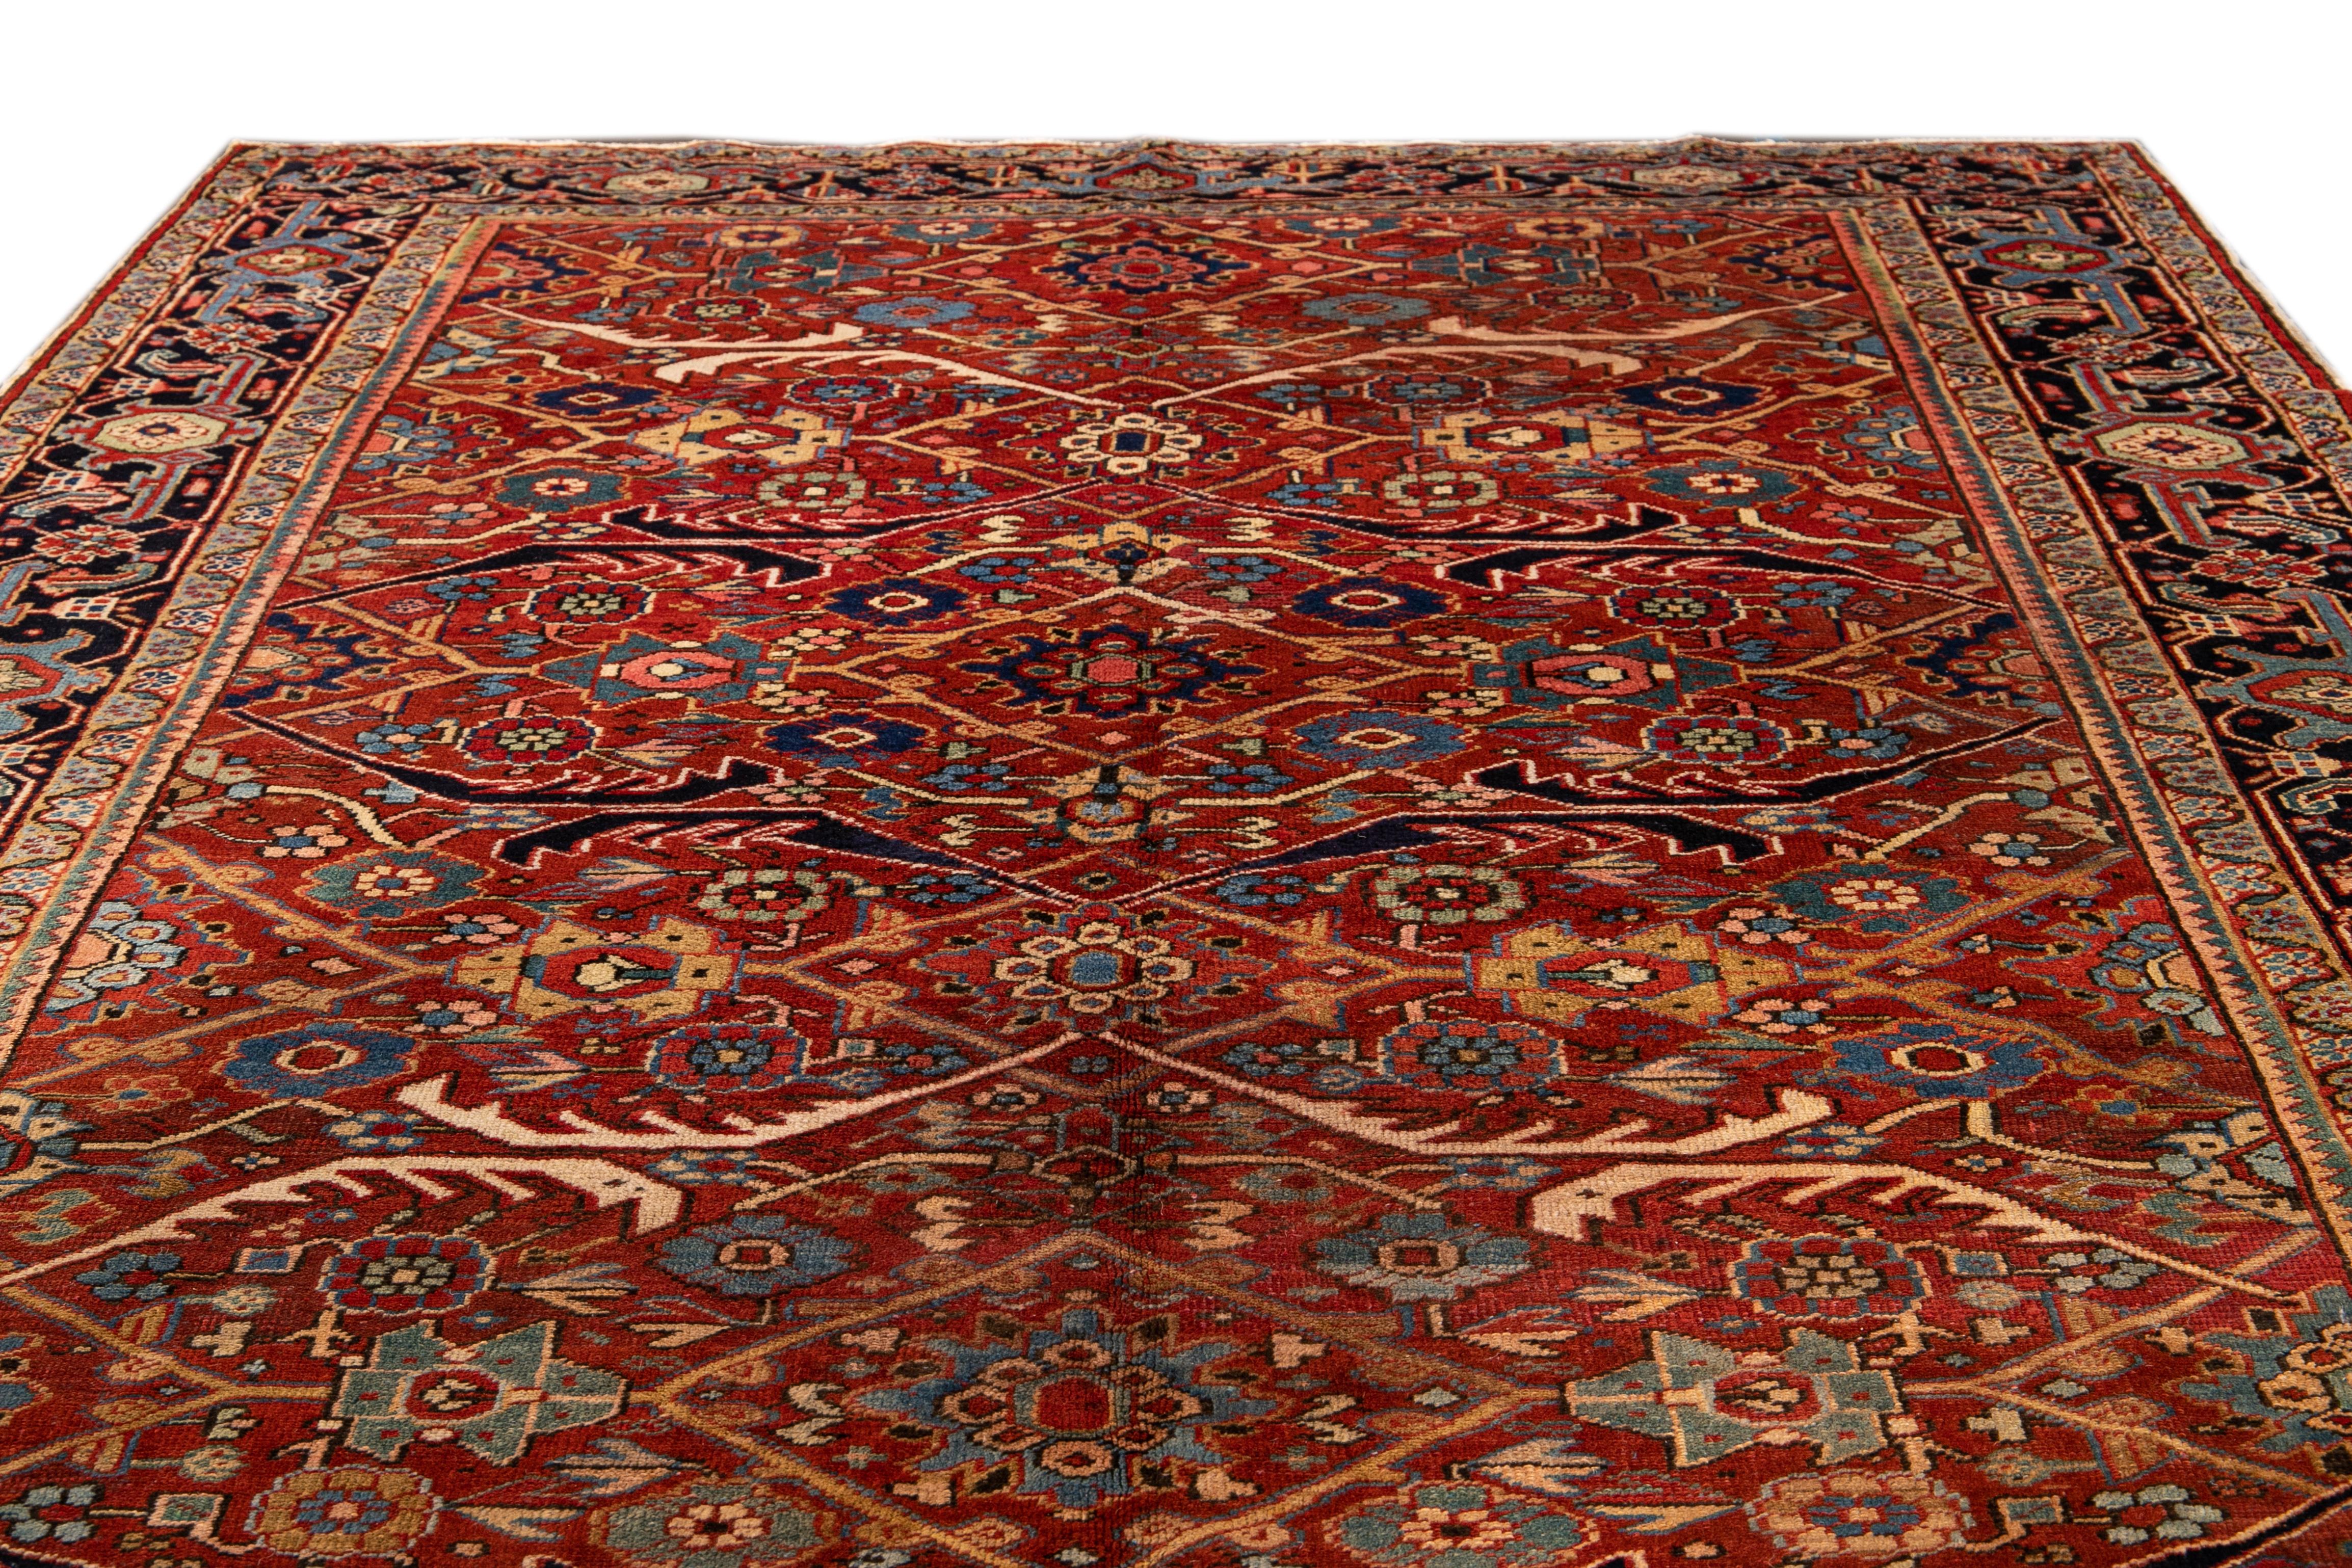 Beautiful antique Persian Serapi hand-knotted wool rug with a red field. This Serapi rug has a navy-blue frame and multi-color accents in an all-over gorgeous geometric medallion floral design.

This rug measures: 7'9